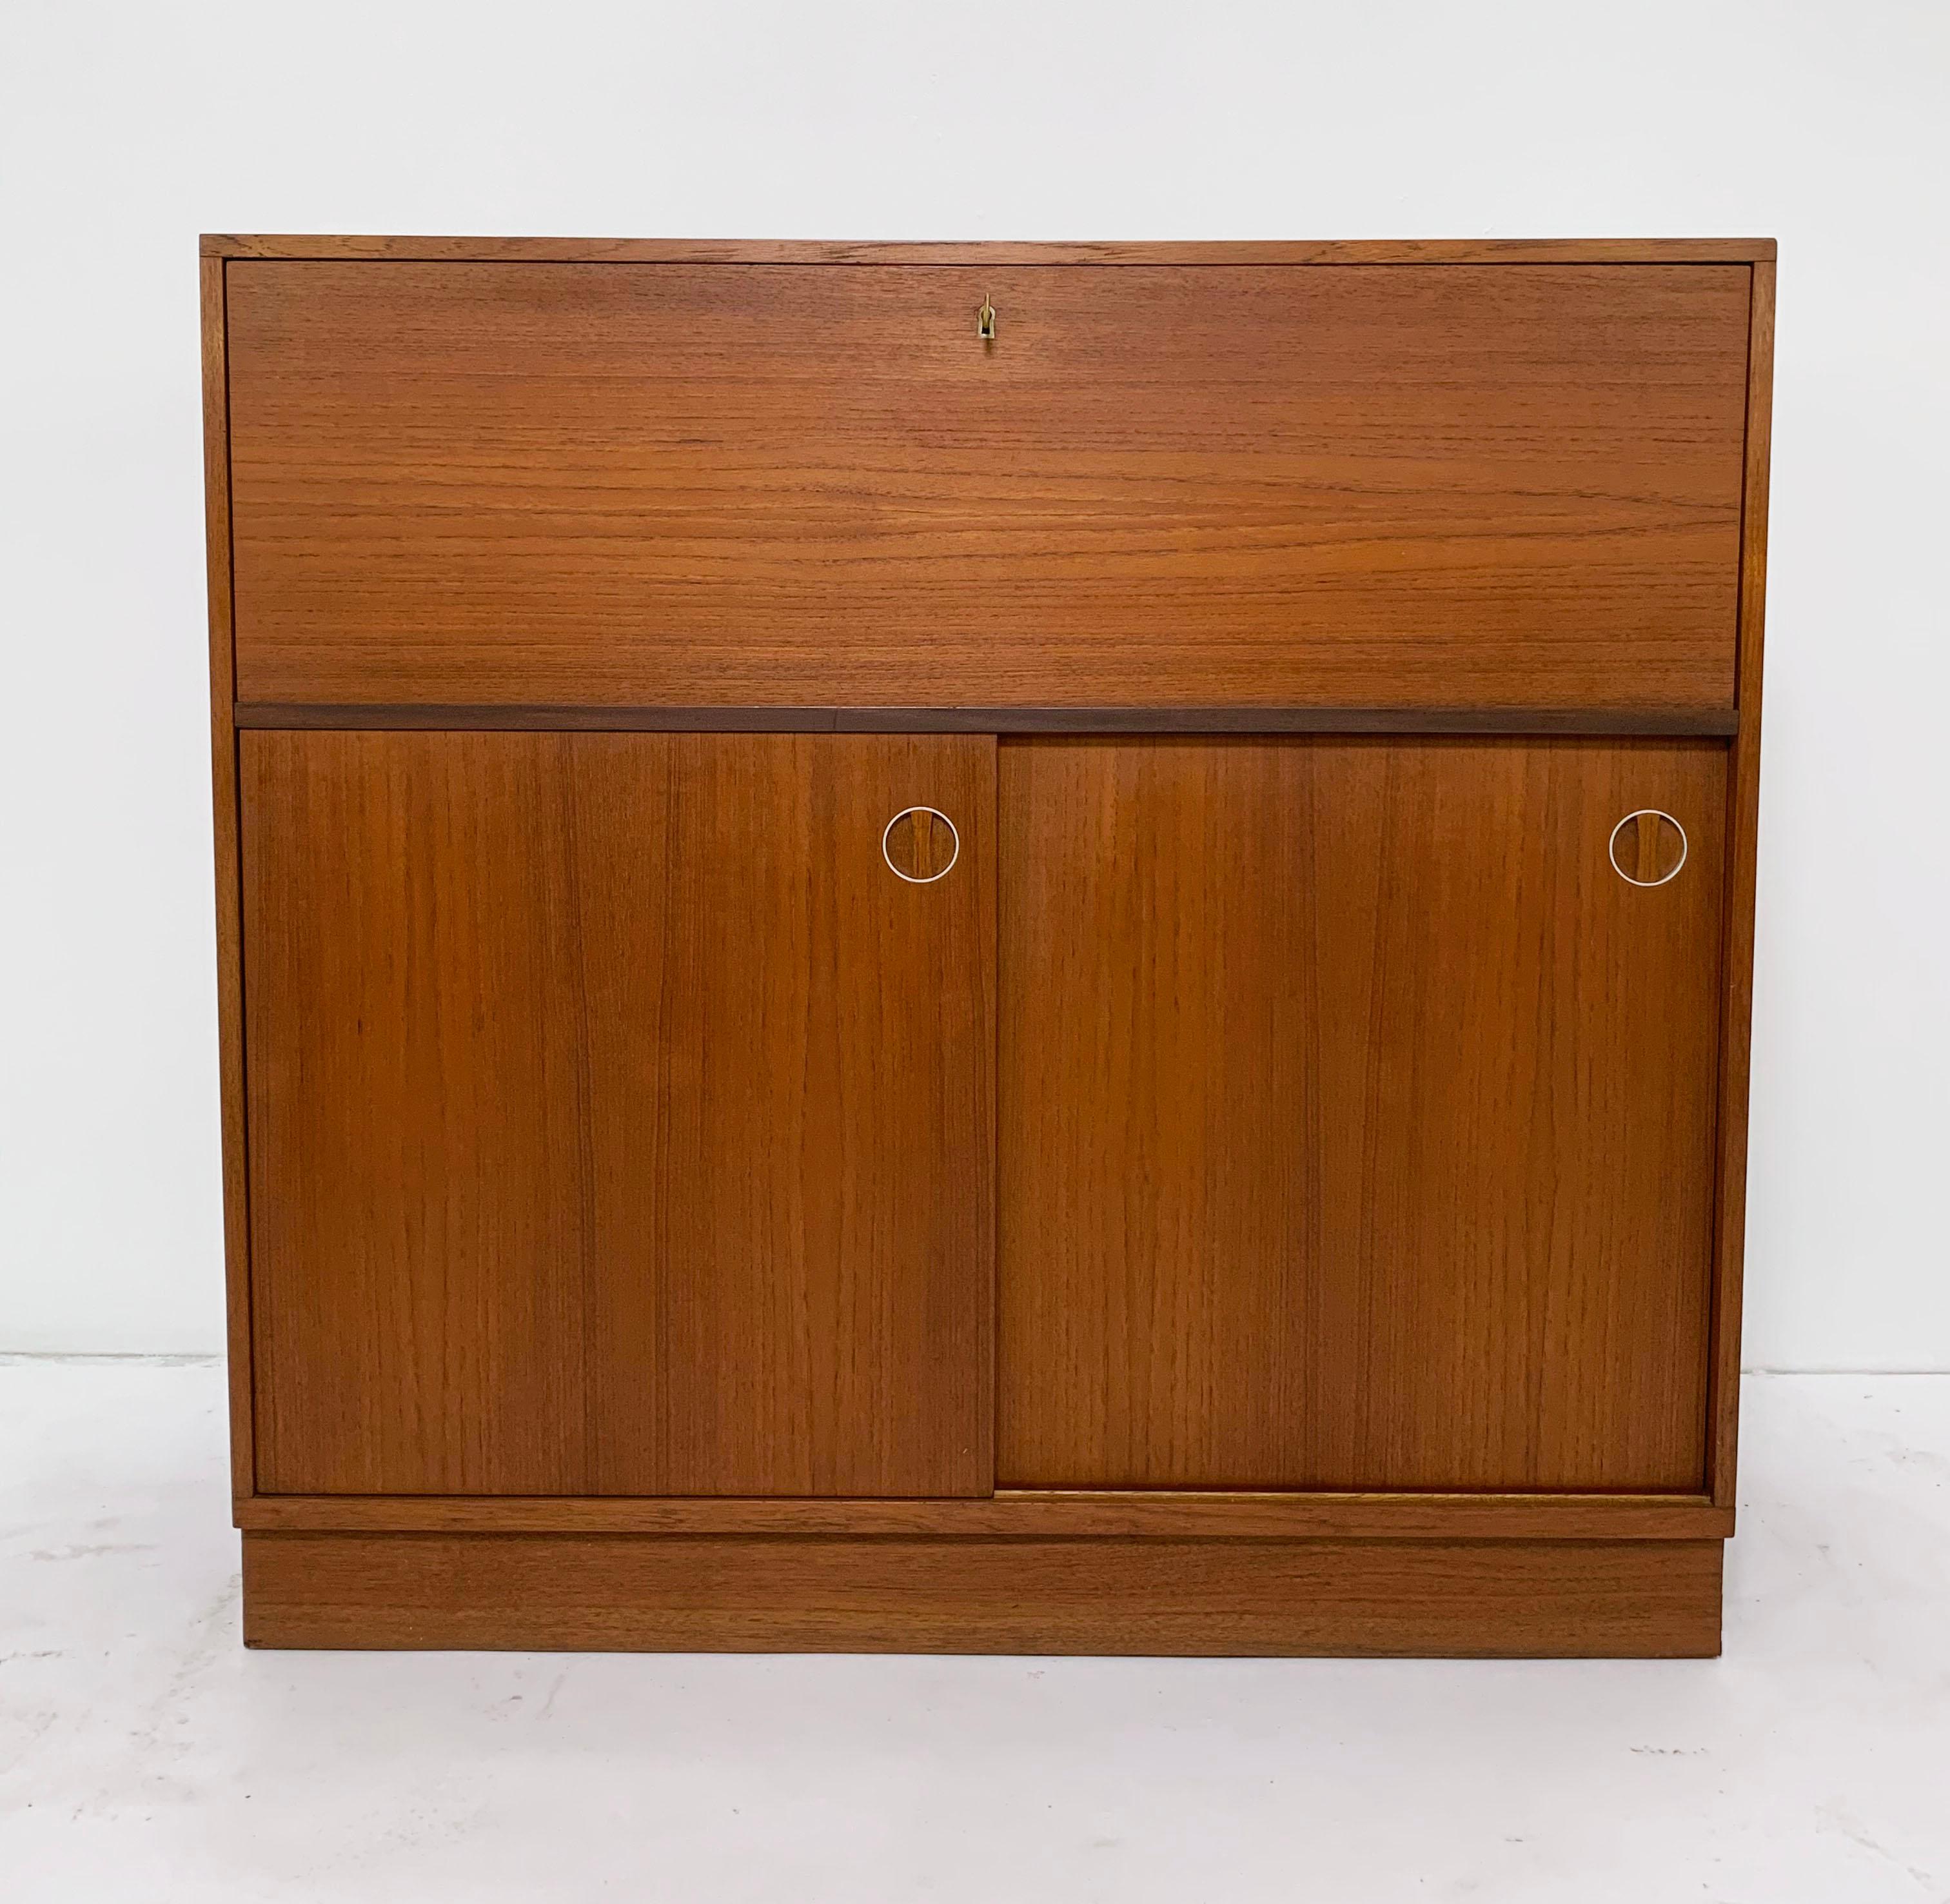 Teak secretary desk / cabinet, made in Sweden circa 1970s. Unusual finger joints at top edges. Drop down desk surface would make an excellent entry way unit.

When open, measures 23.5